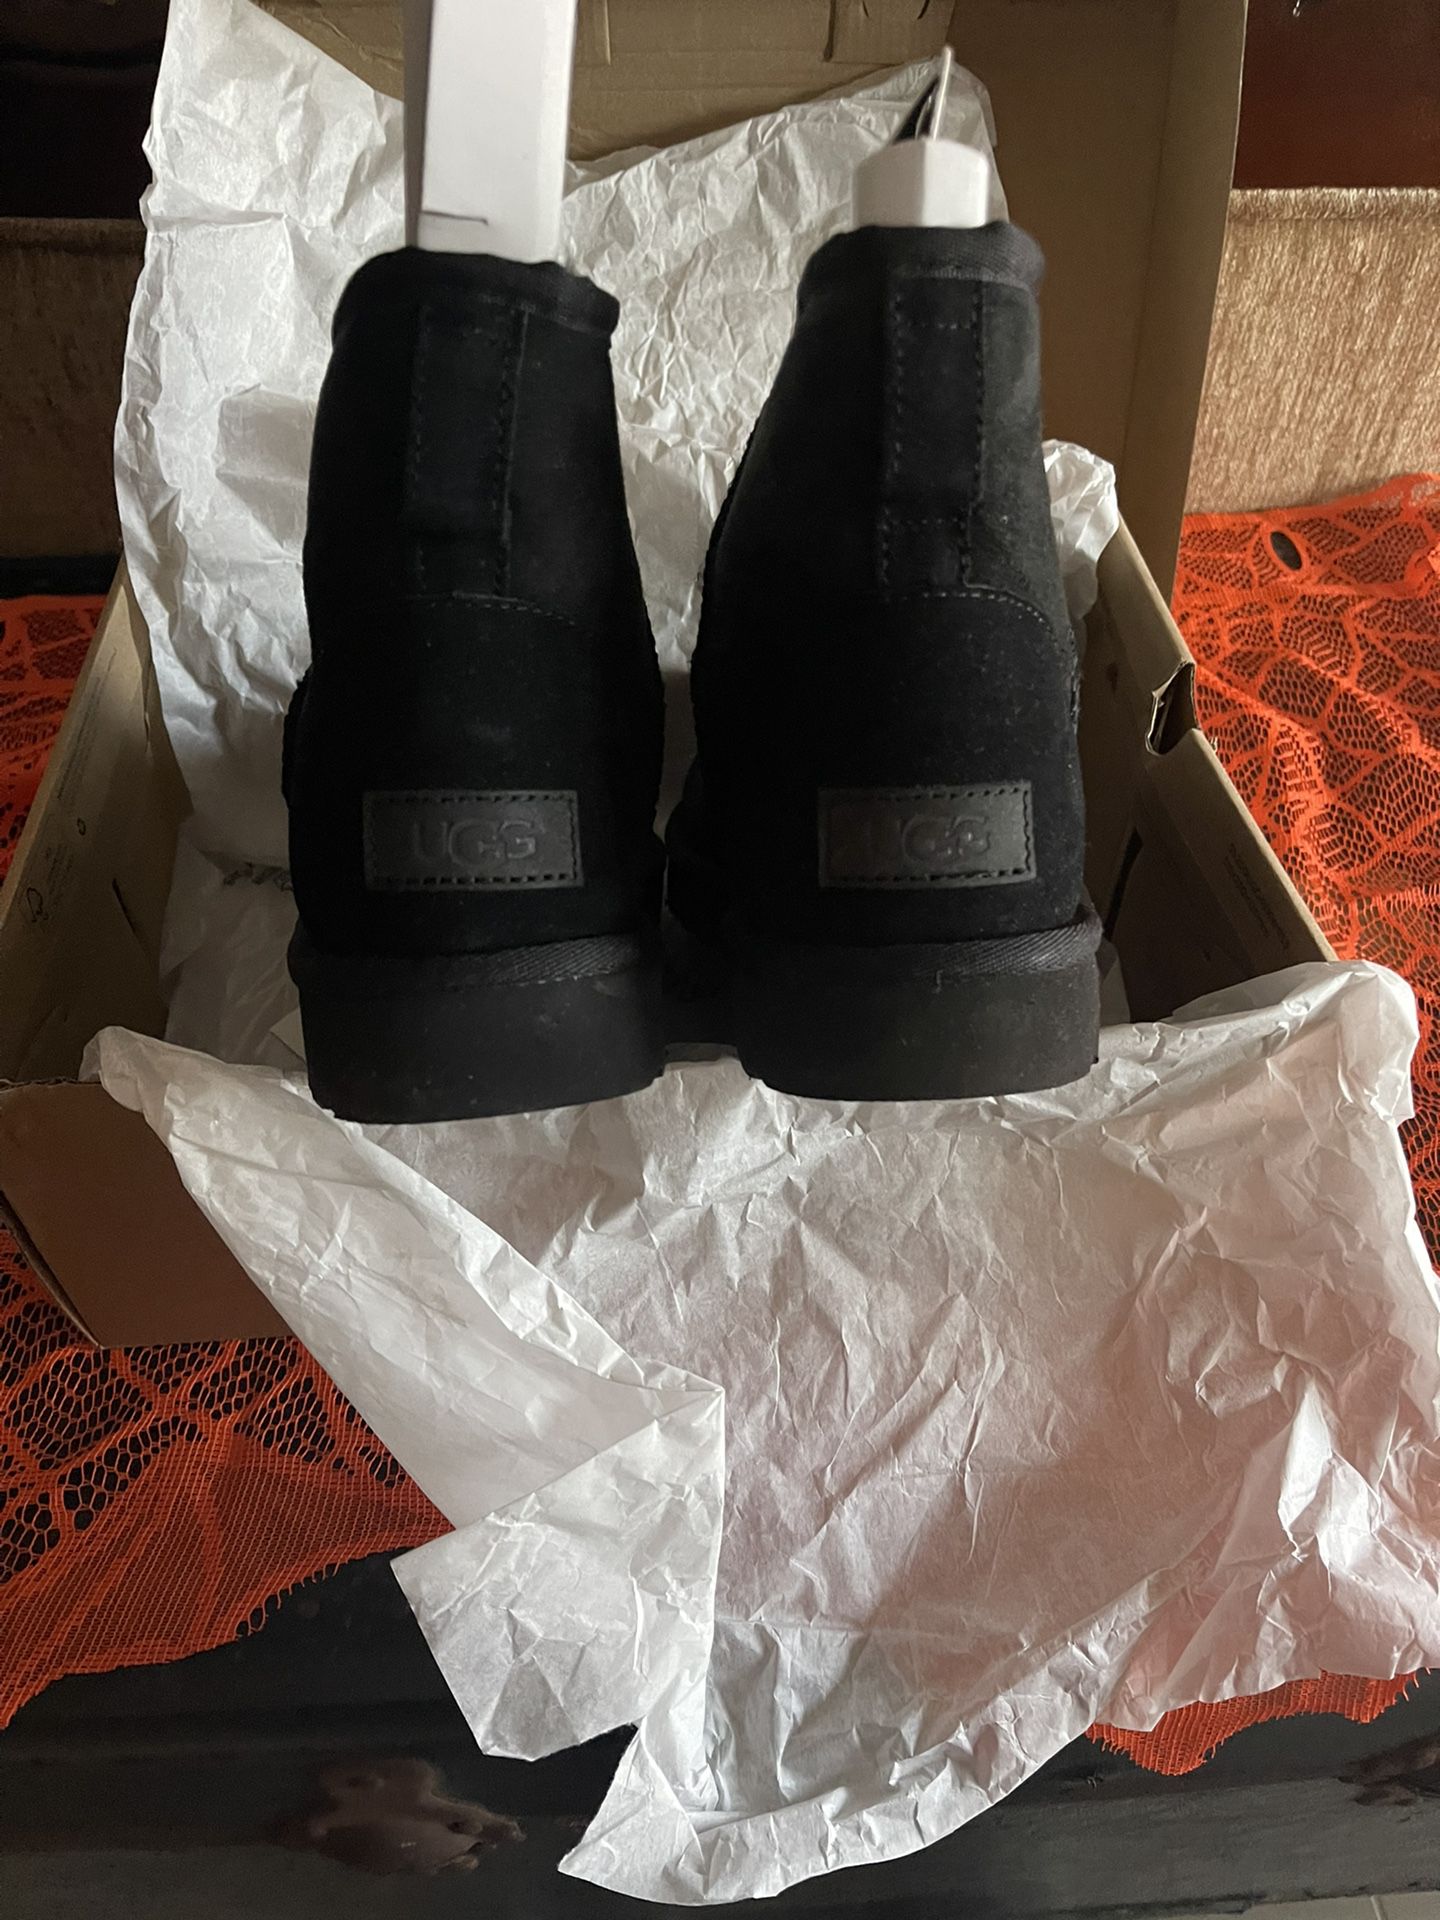 Ugg Boots Size 9 New In Box